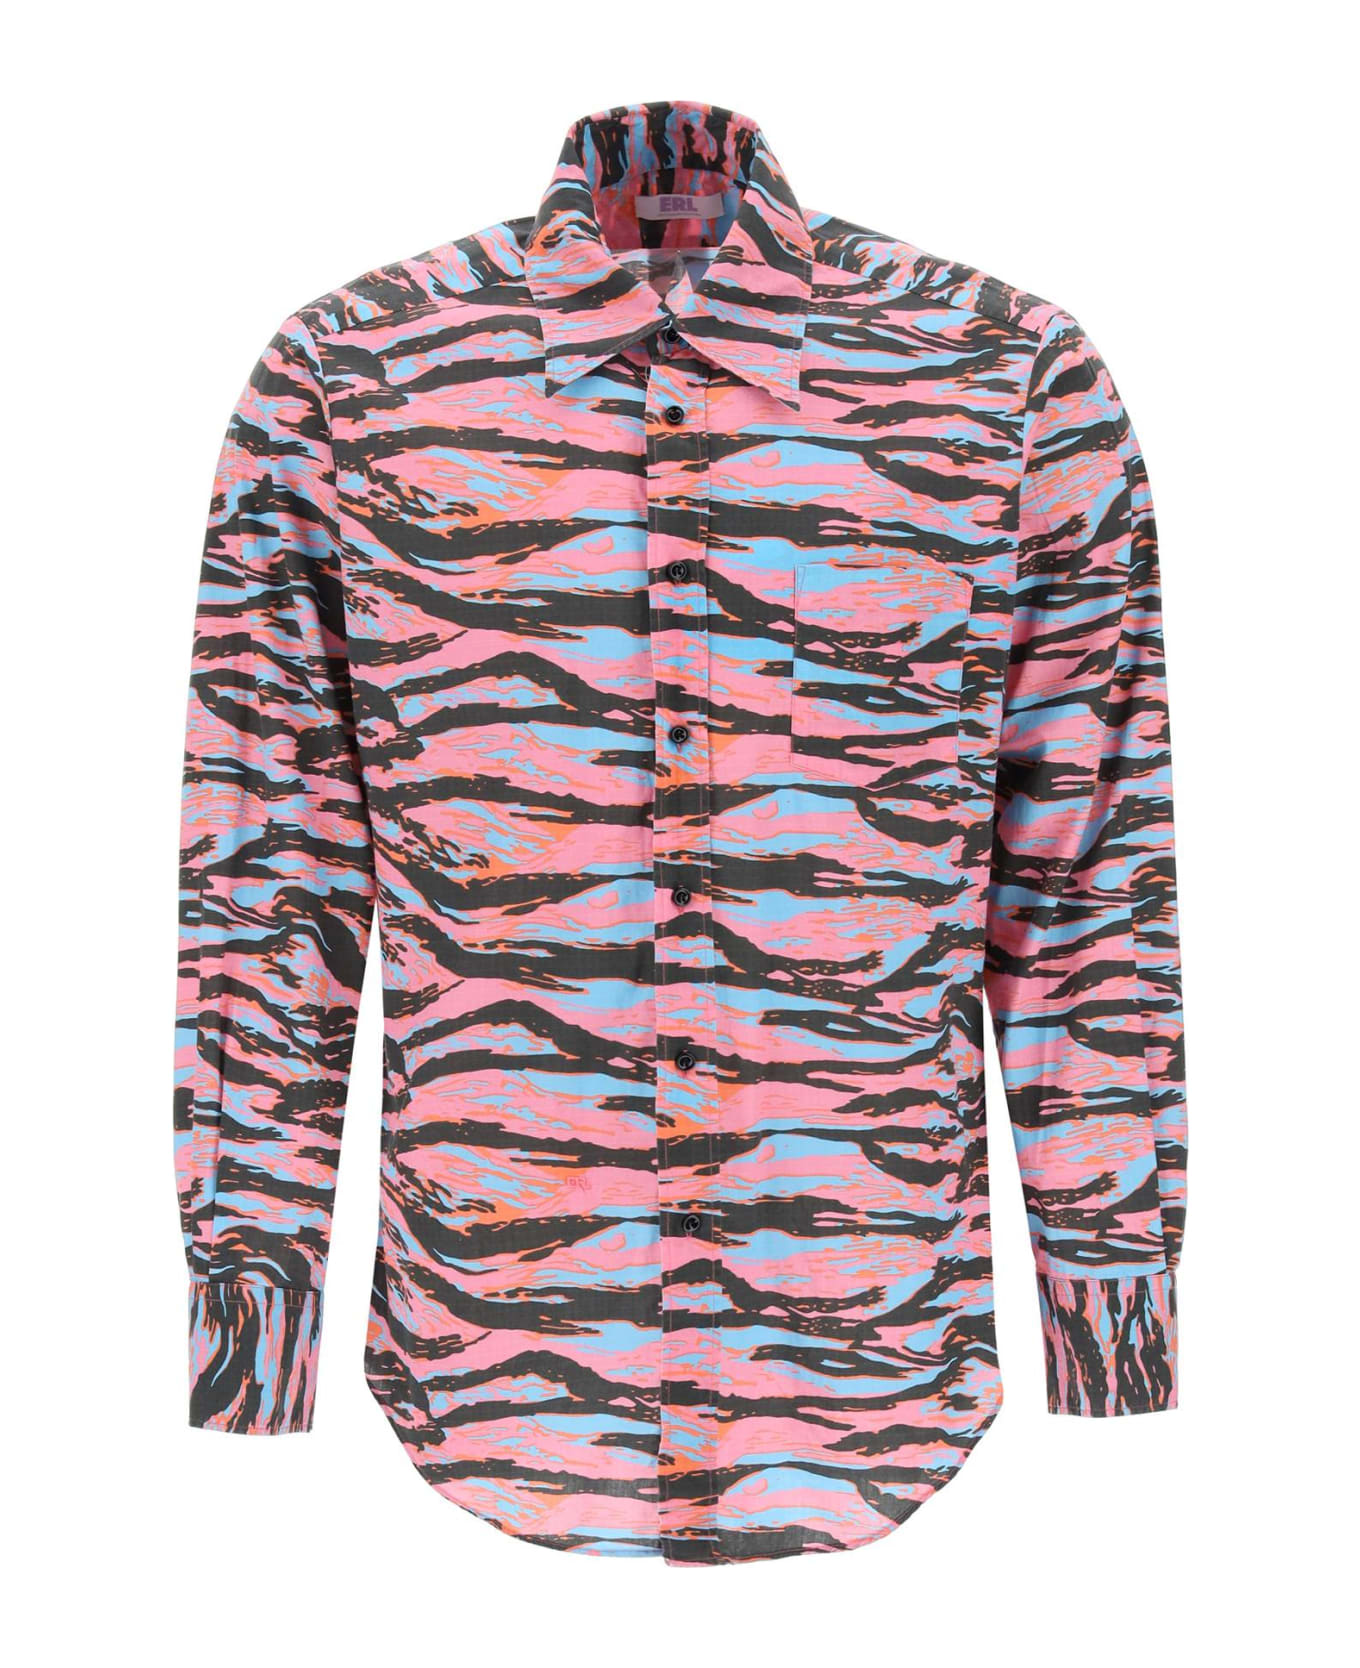 ERL Camouflage Cotton Shirt - ERL PINK RAVE CAMO 2 (Black) シャツ